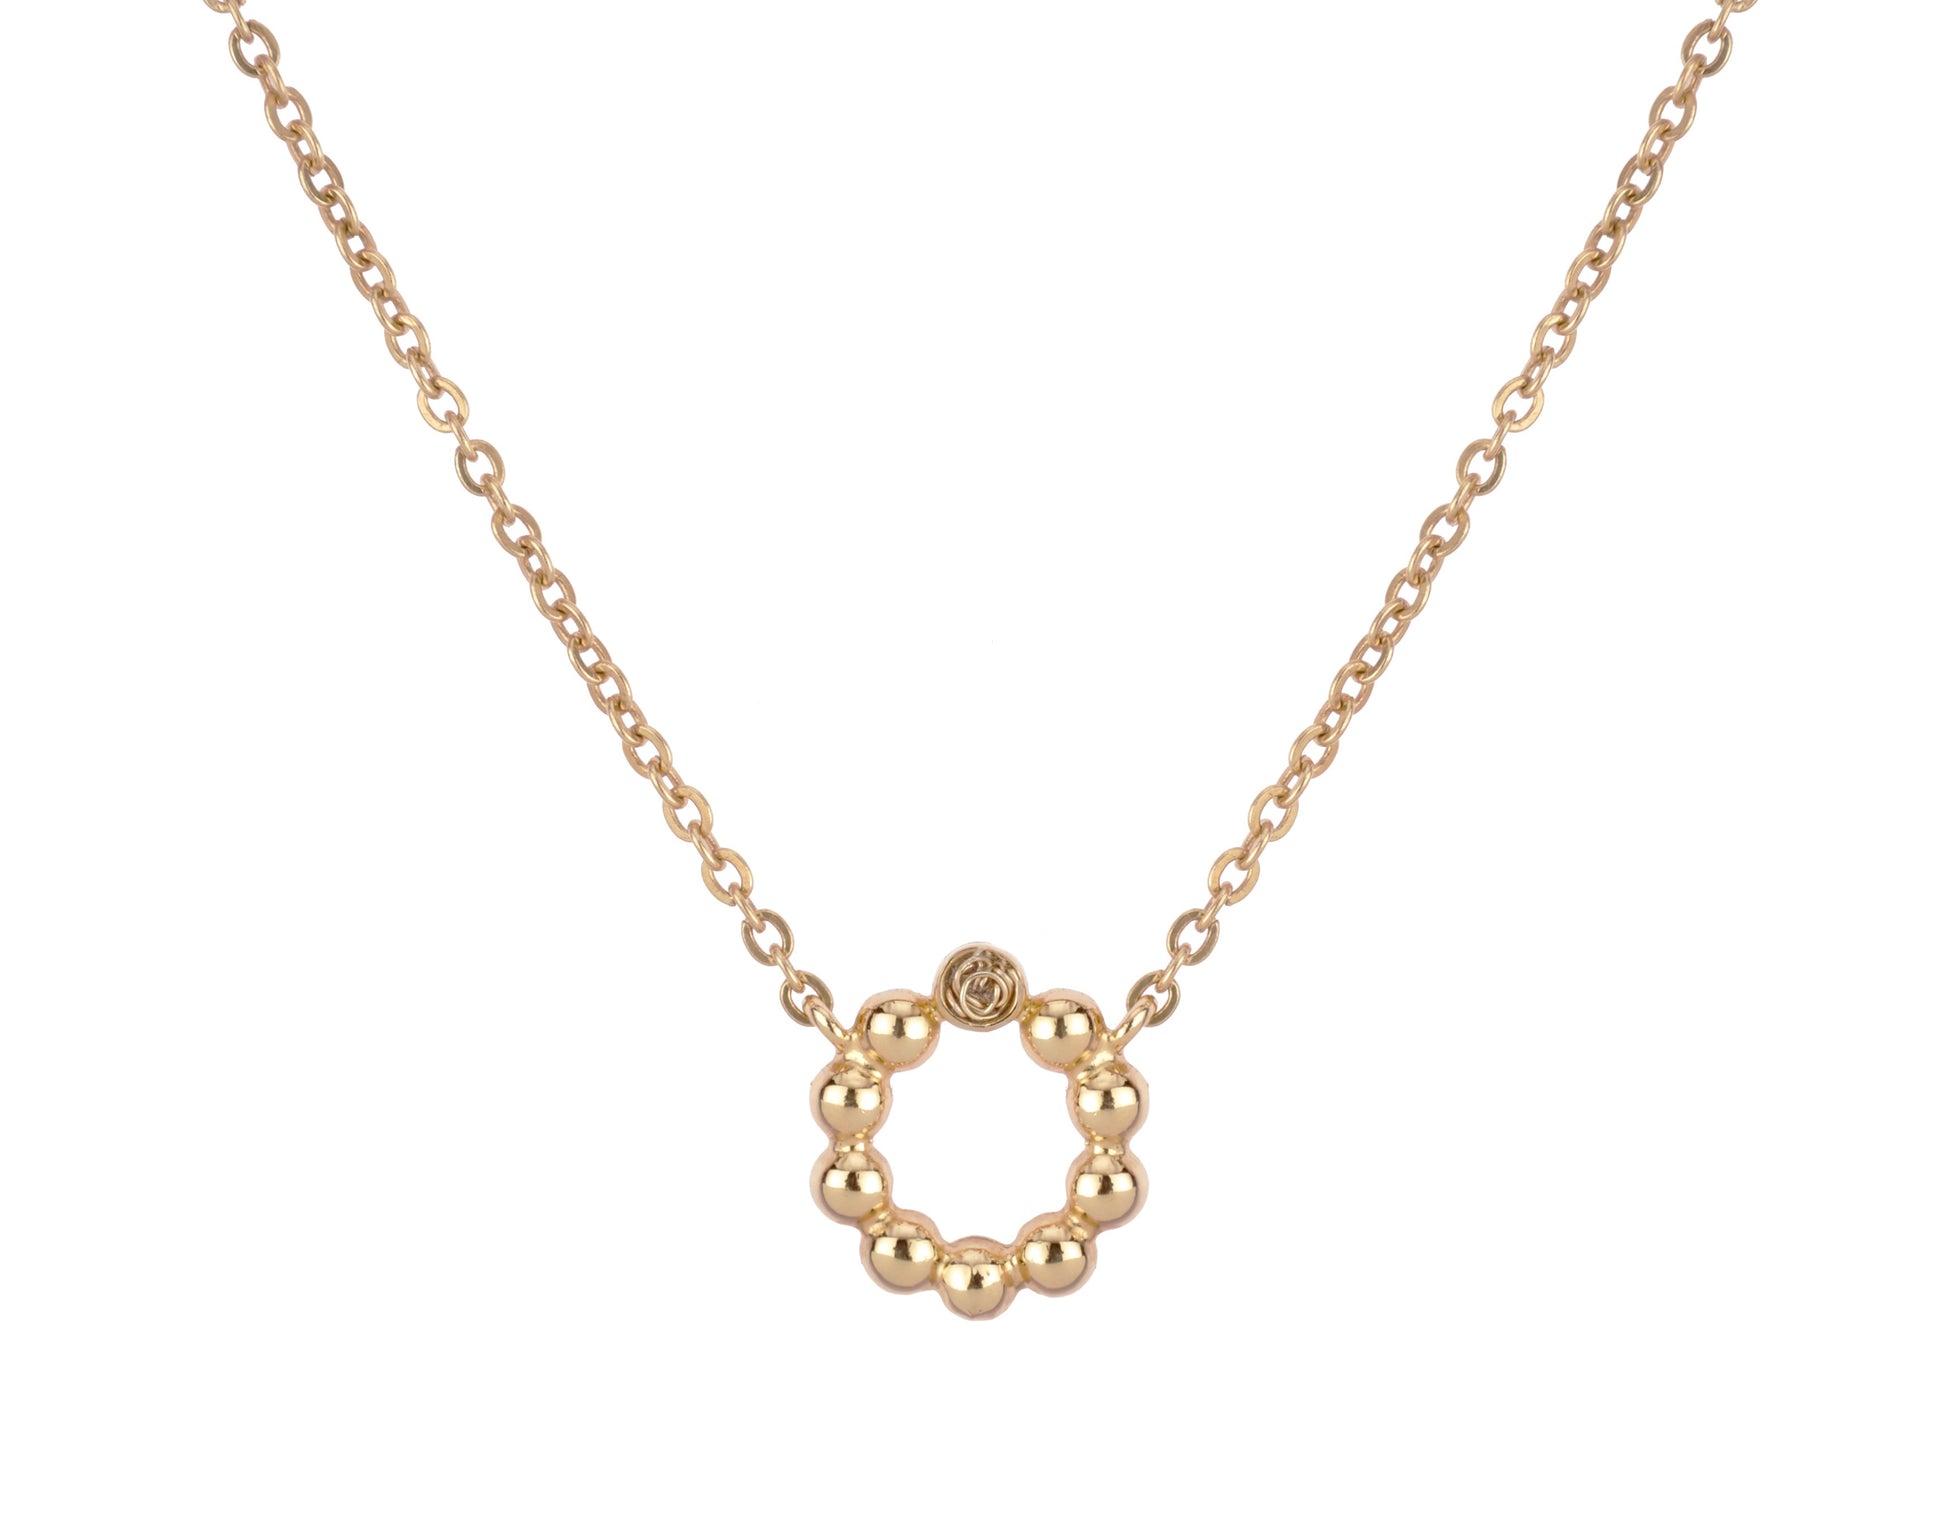 Unique gold chain necklace with a modern twist, providing a chic and timeless accessory.